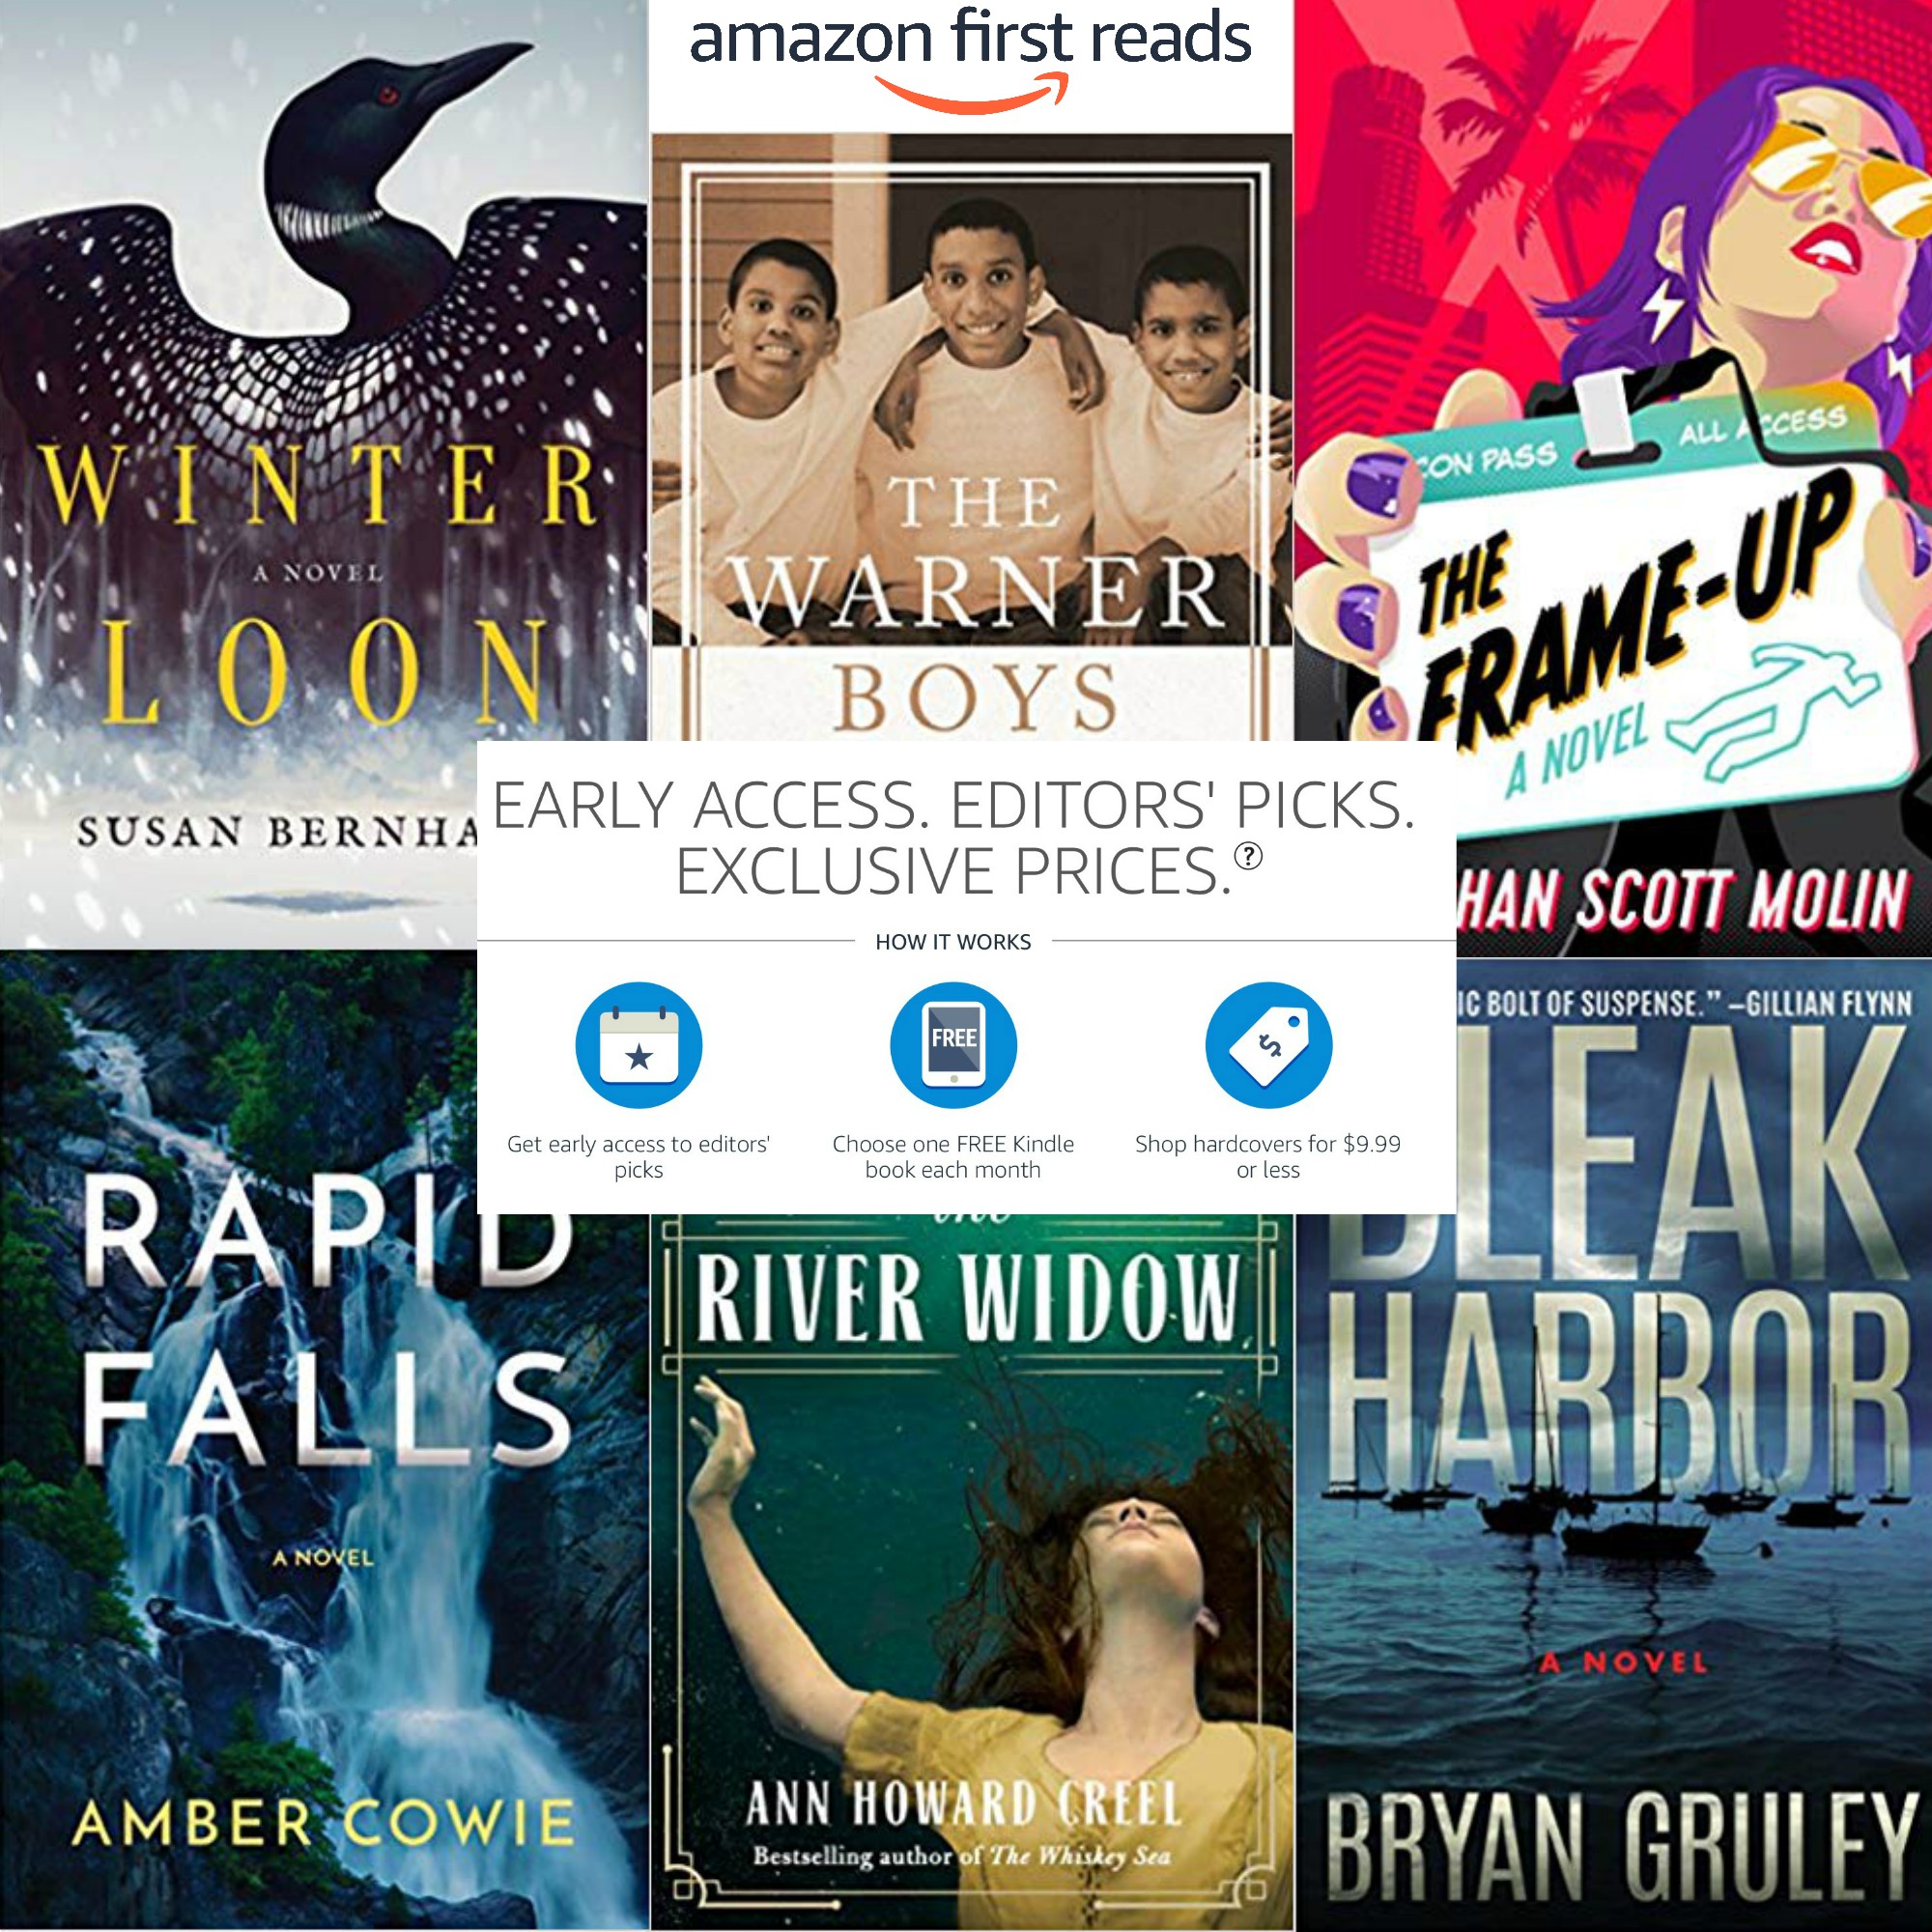 Amazon First Reads November Books